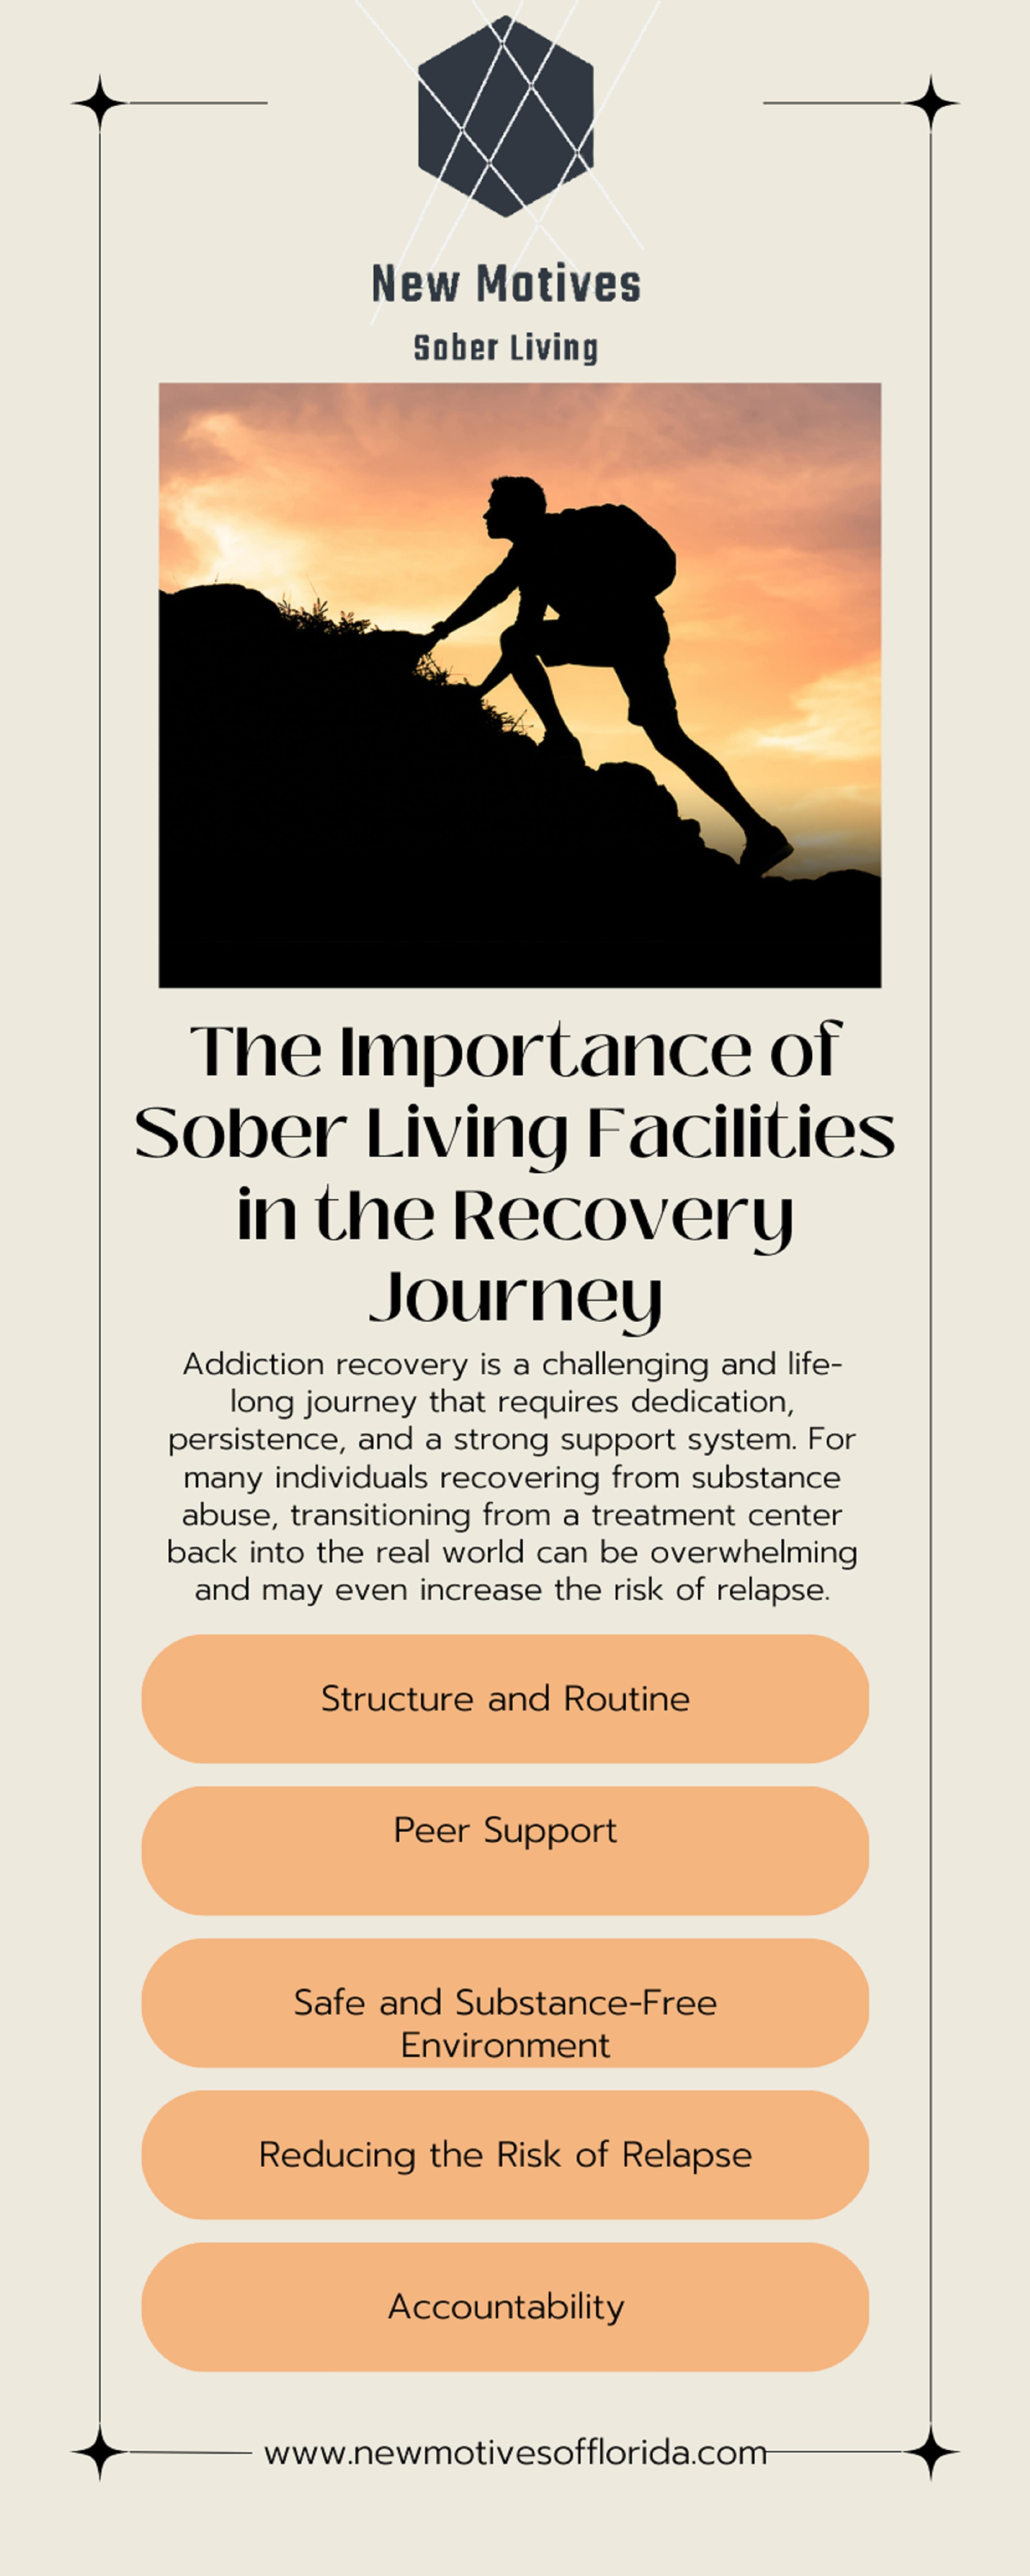 New Motives
Sober Living

 

The Importance of
Sober Living Facilities
in the Recovery
Journey

Addiction recovery is a challenging and life-
long journey that requires dedication,
persistence, and a strong support system. For
many individuals recovering from substance
abuse, transitioning from a treatment center
back into the real world can be overwhelming
and may even increase the risk of relapse.

Structure and Routine

Peer Support

Safe and Substance-Free
Environment

Reducing the Risk of Relapse

Accountability

 

+

www.newmotivesofflorida.com—————-